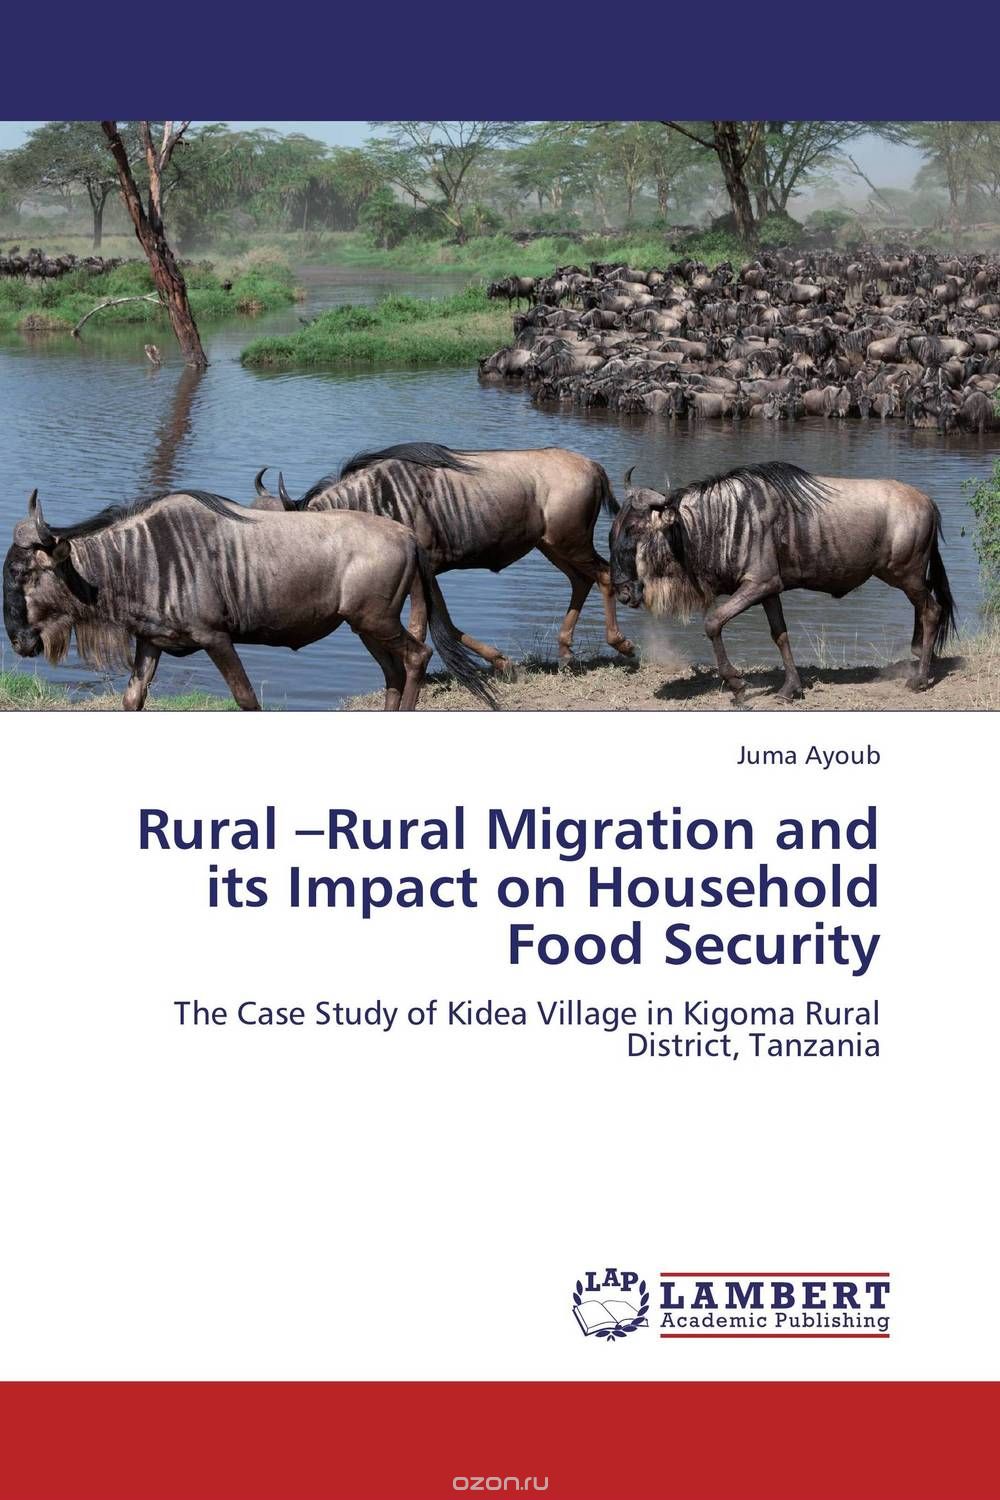 Rural –Rural Migration and its Impact on Household Food Security